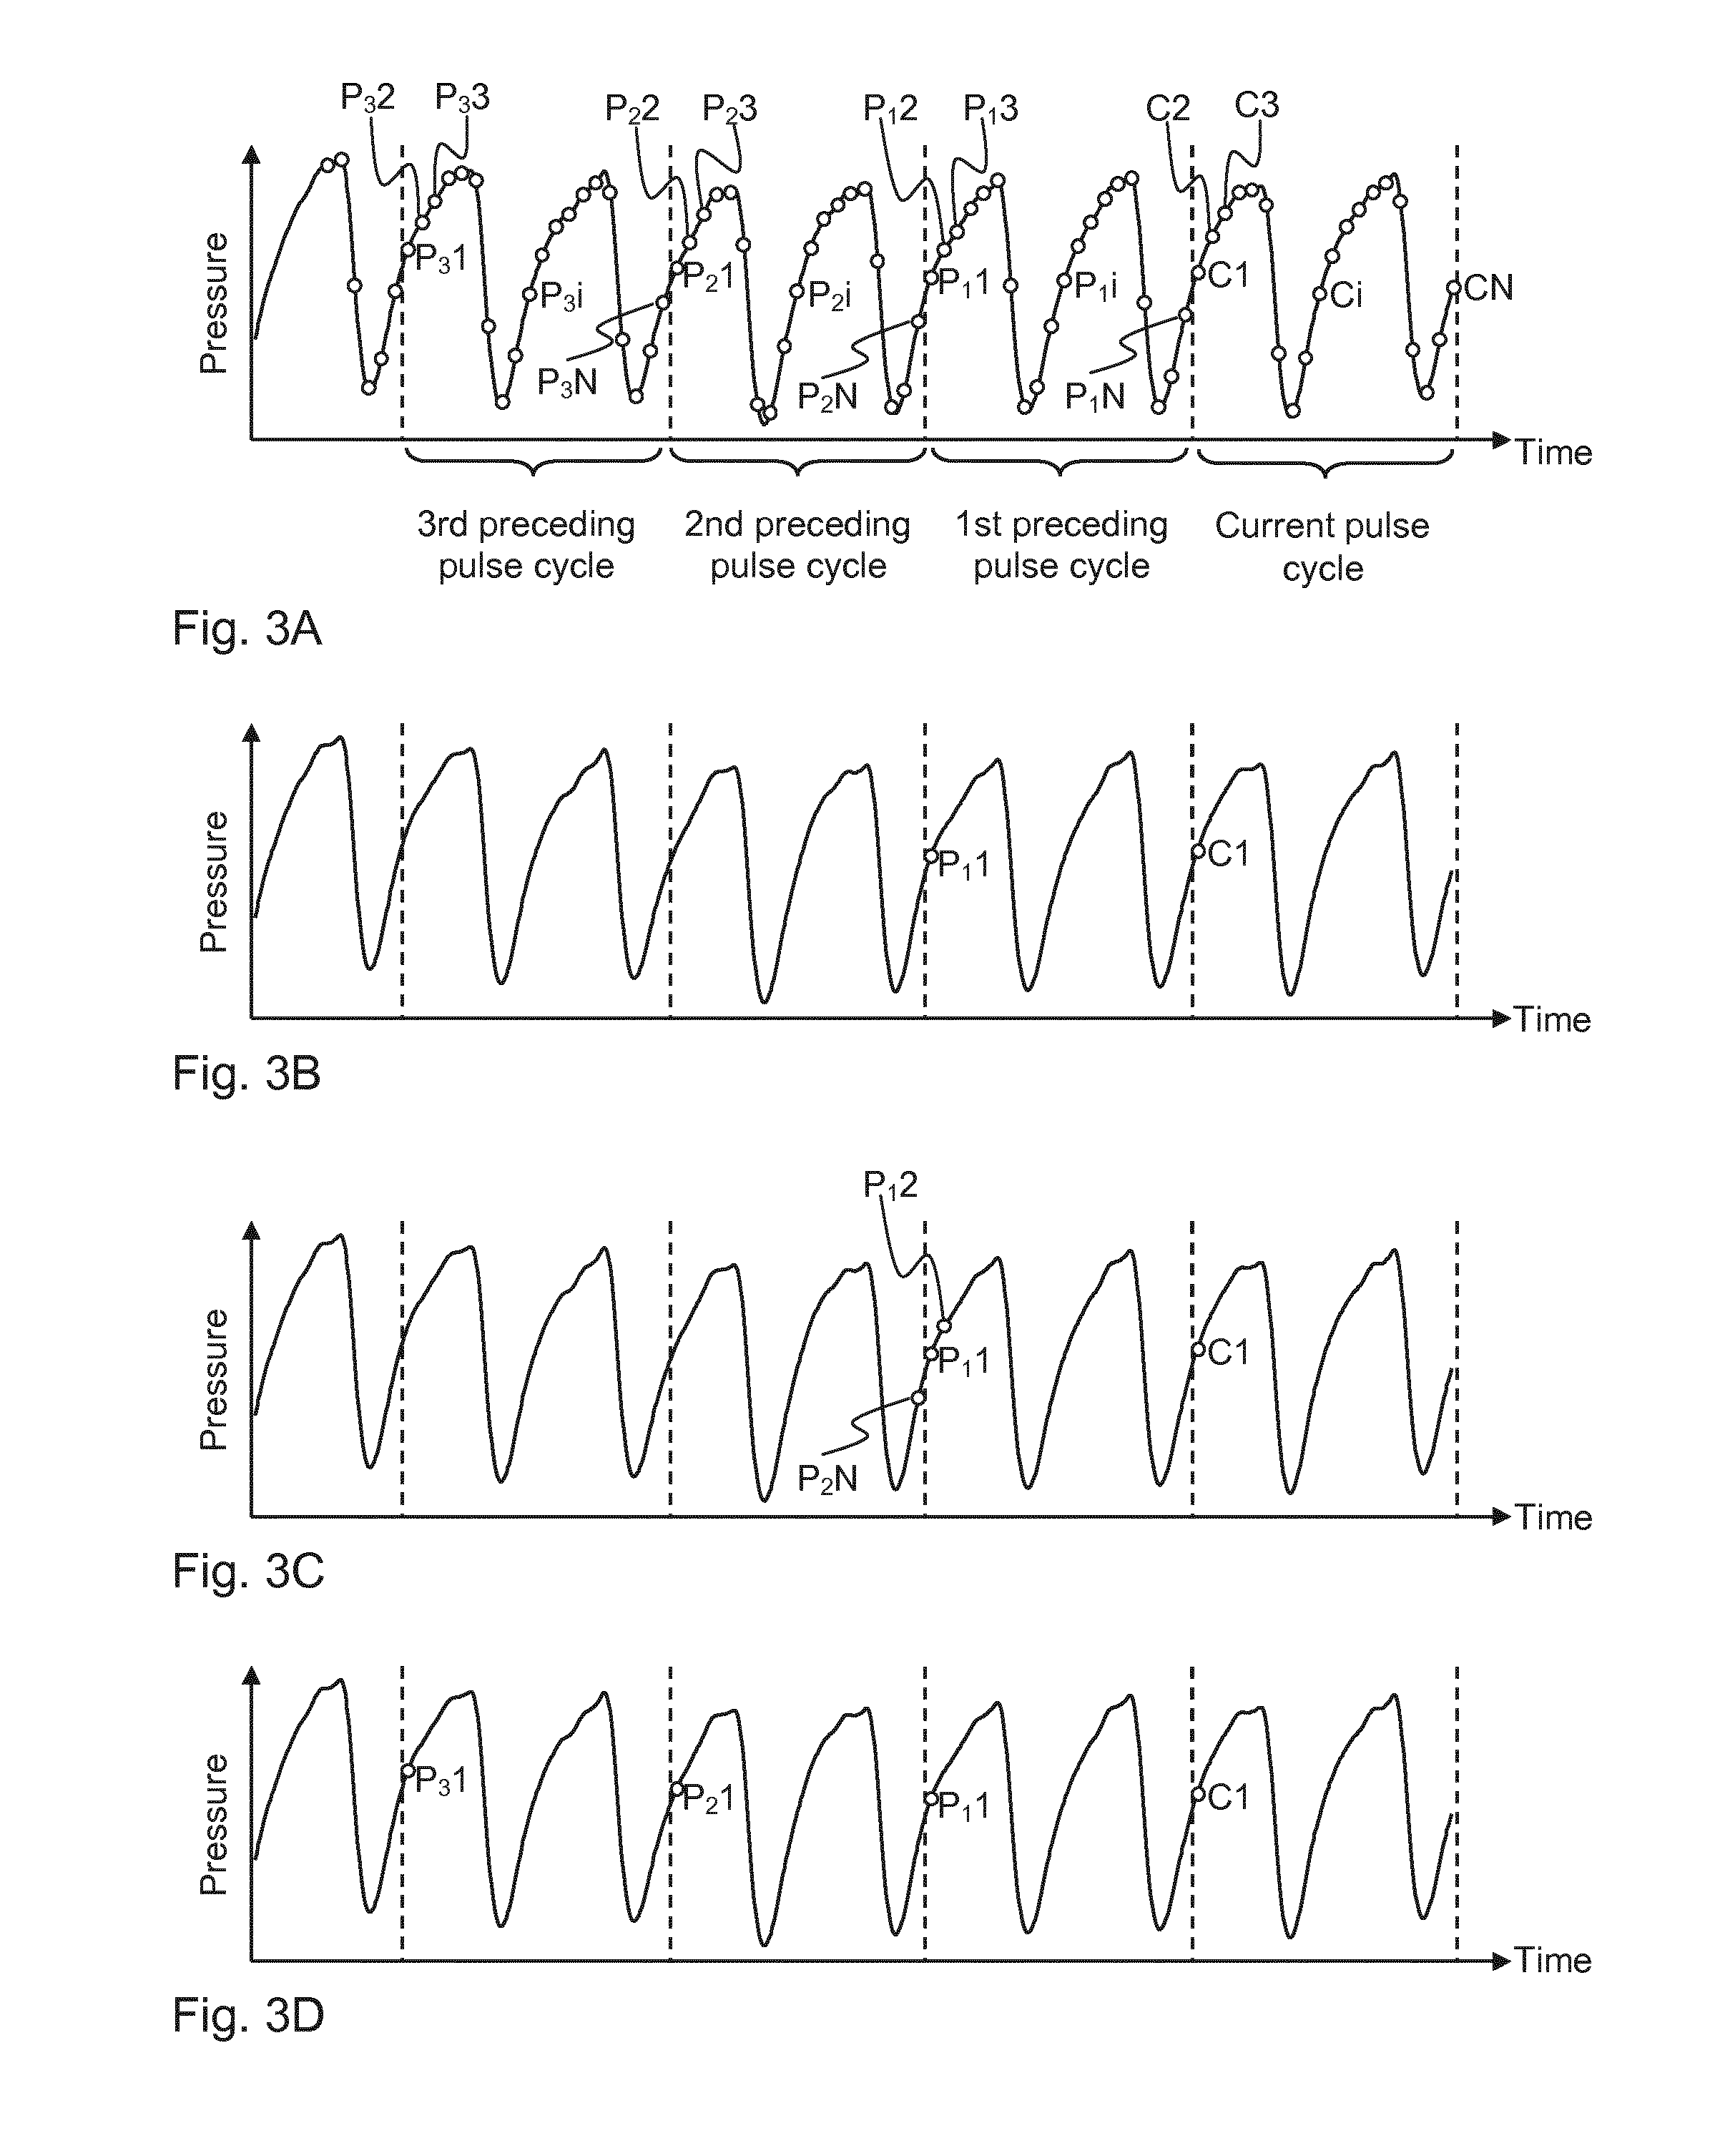 Filtering of a time-dependent pressure signal